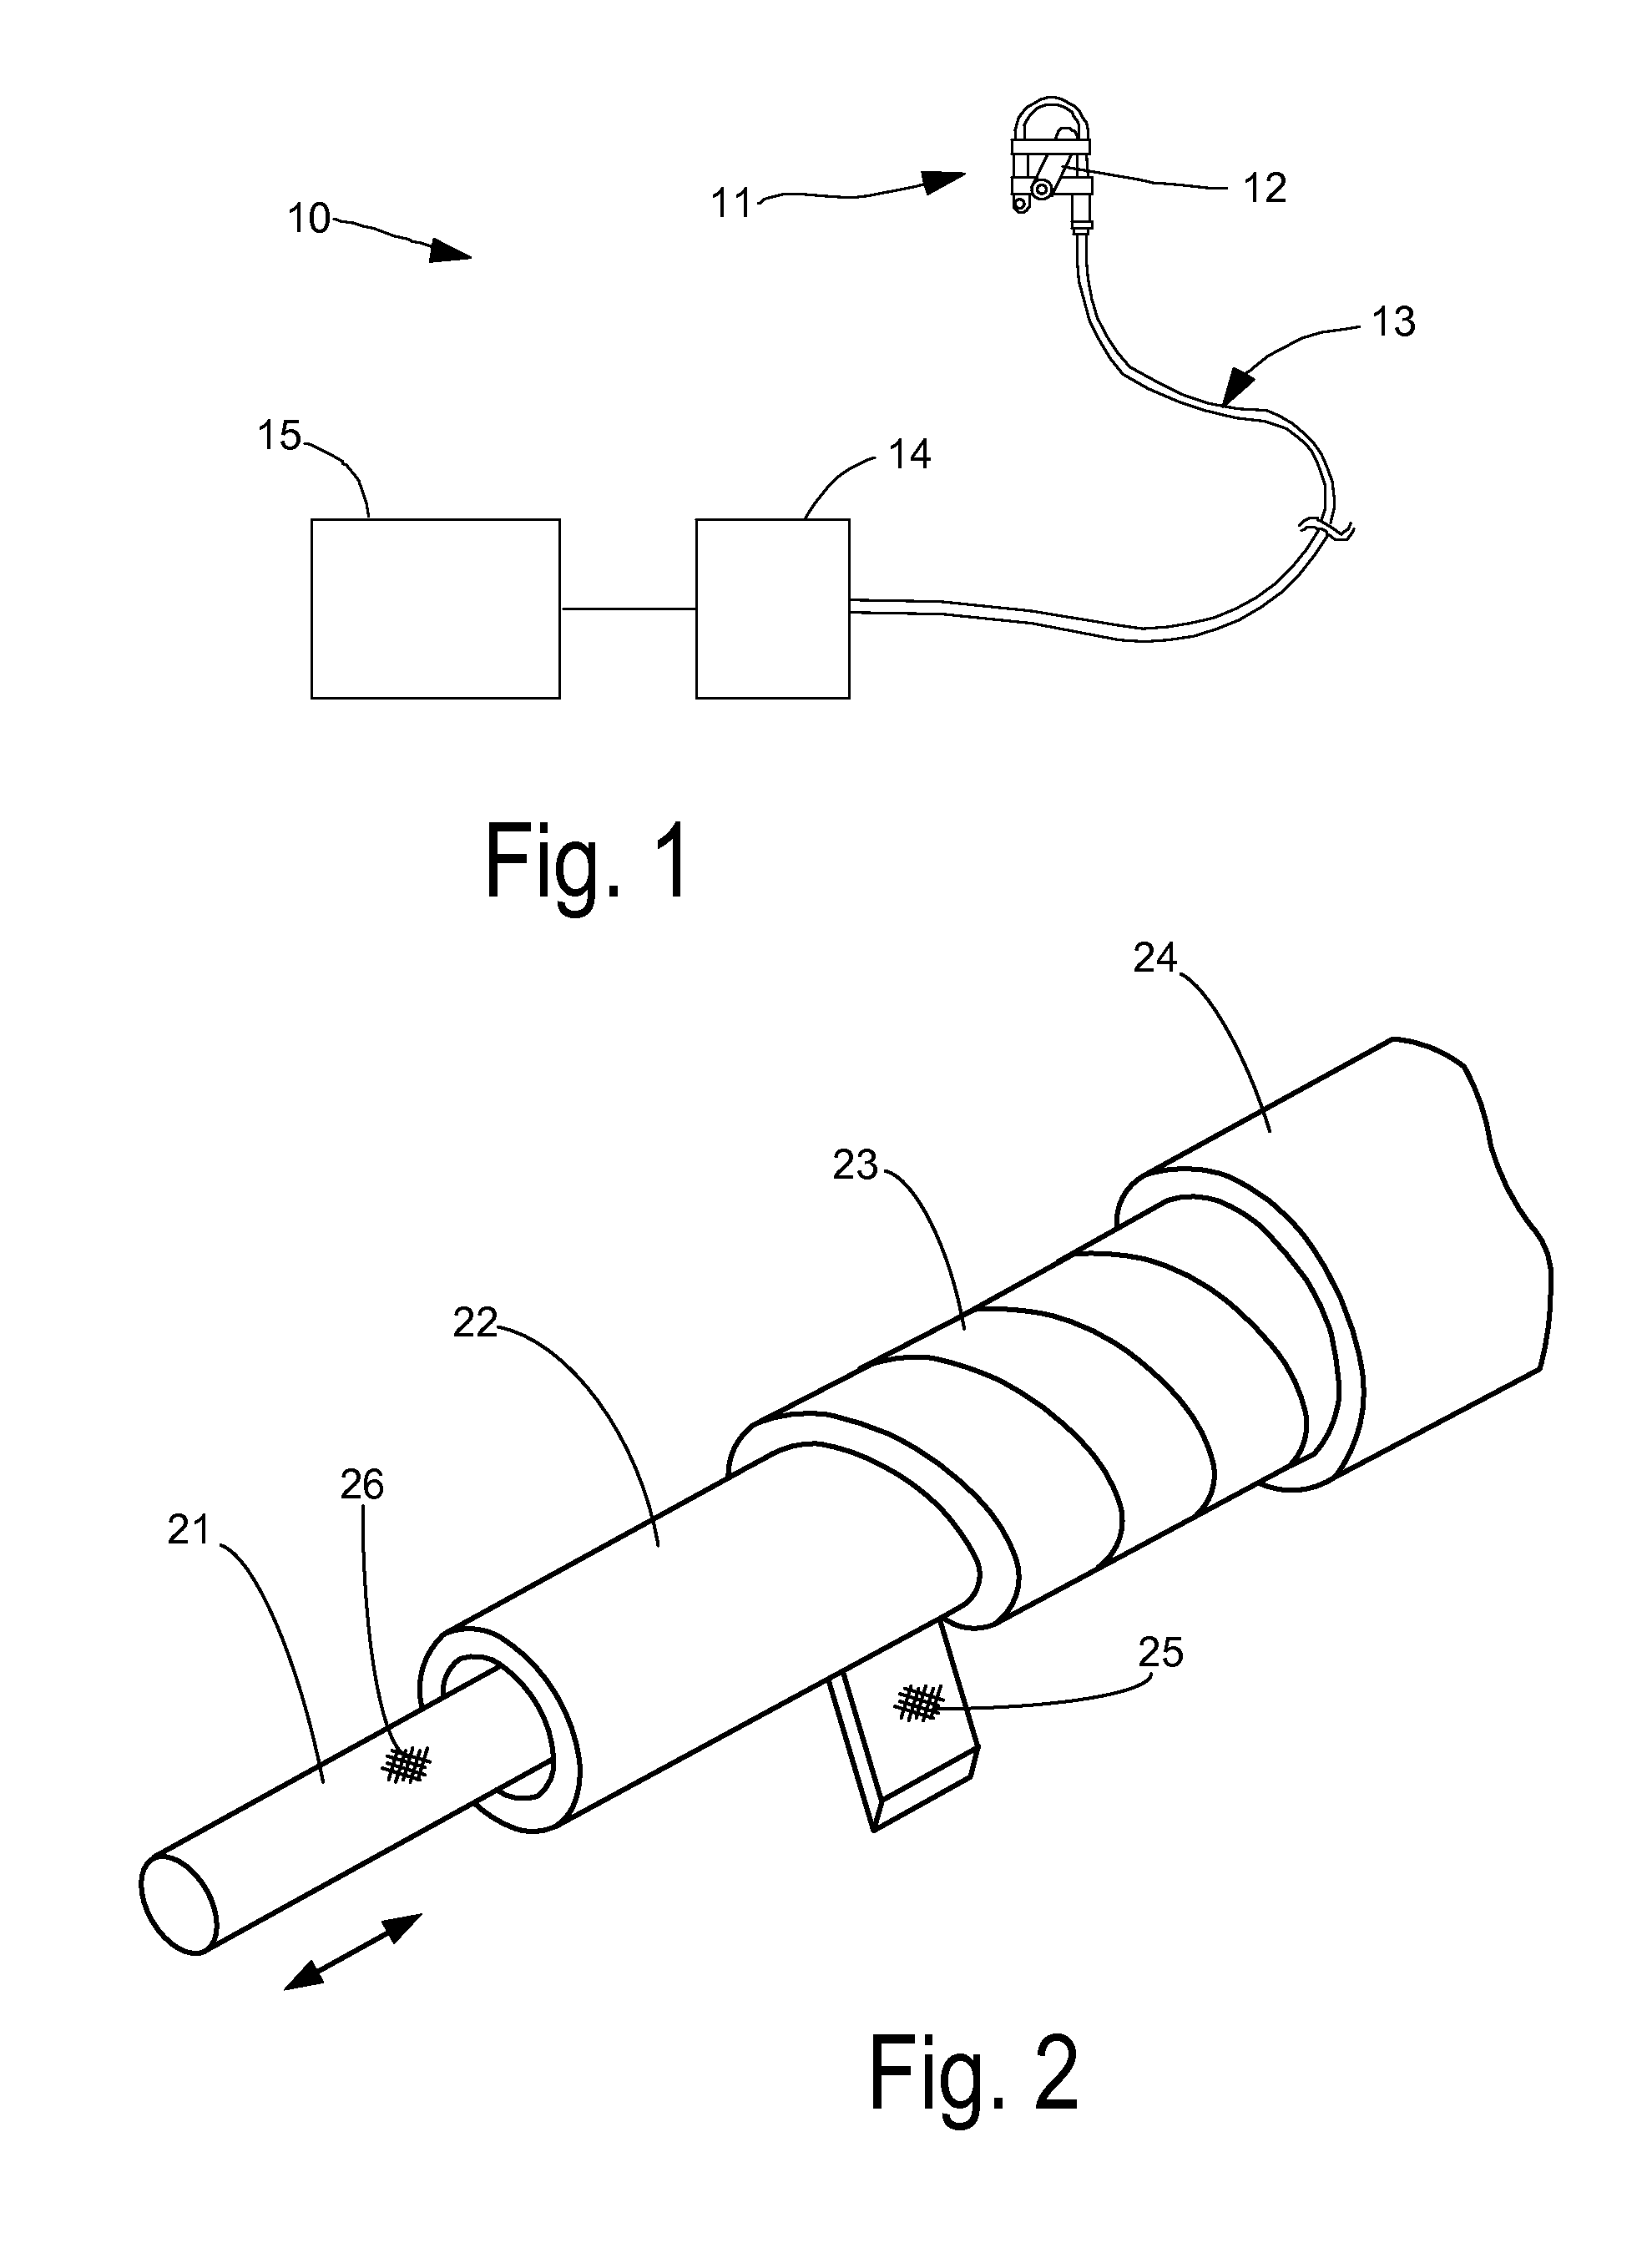 Bowden cable wear detection in a tube clamp system for medical fluids